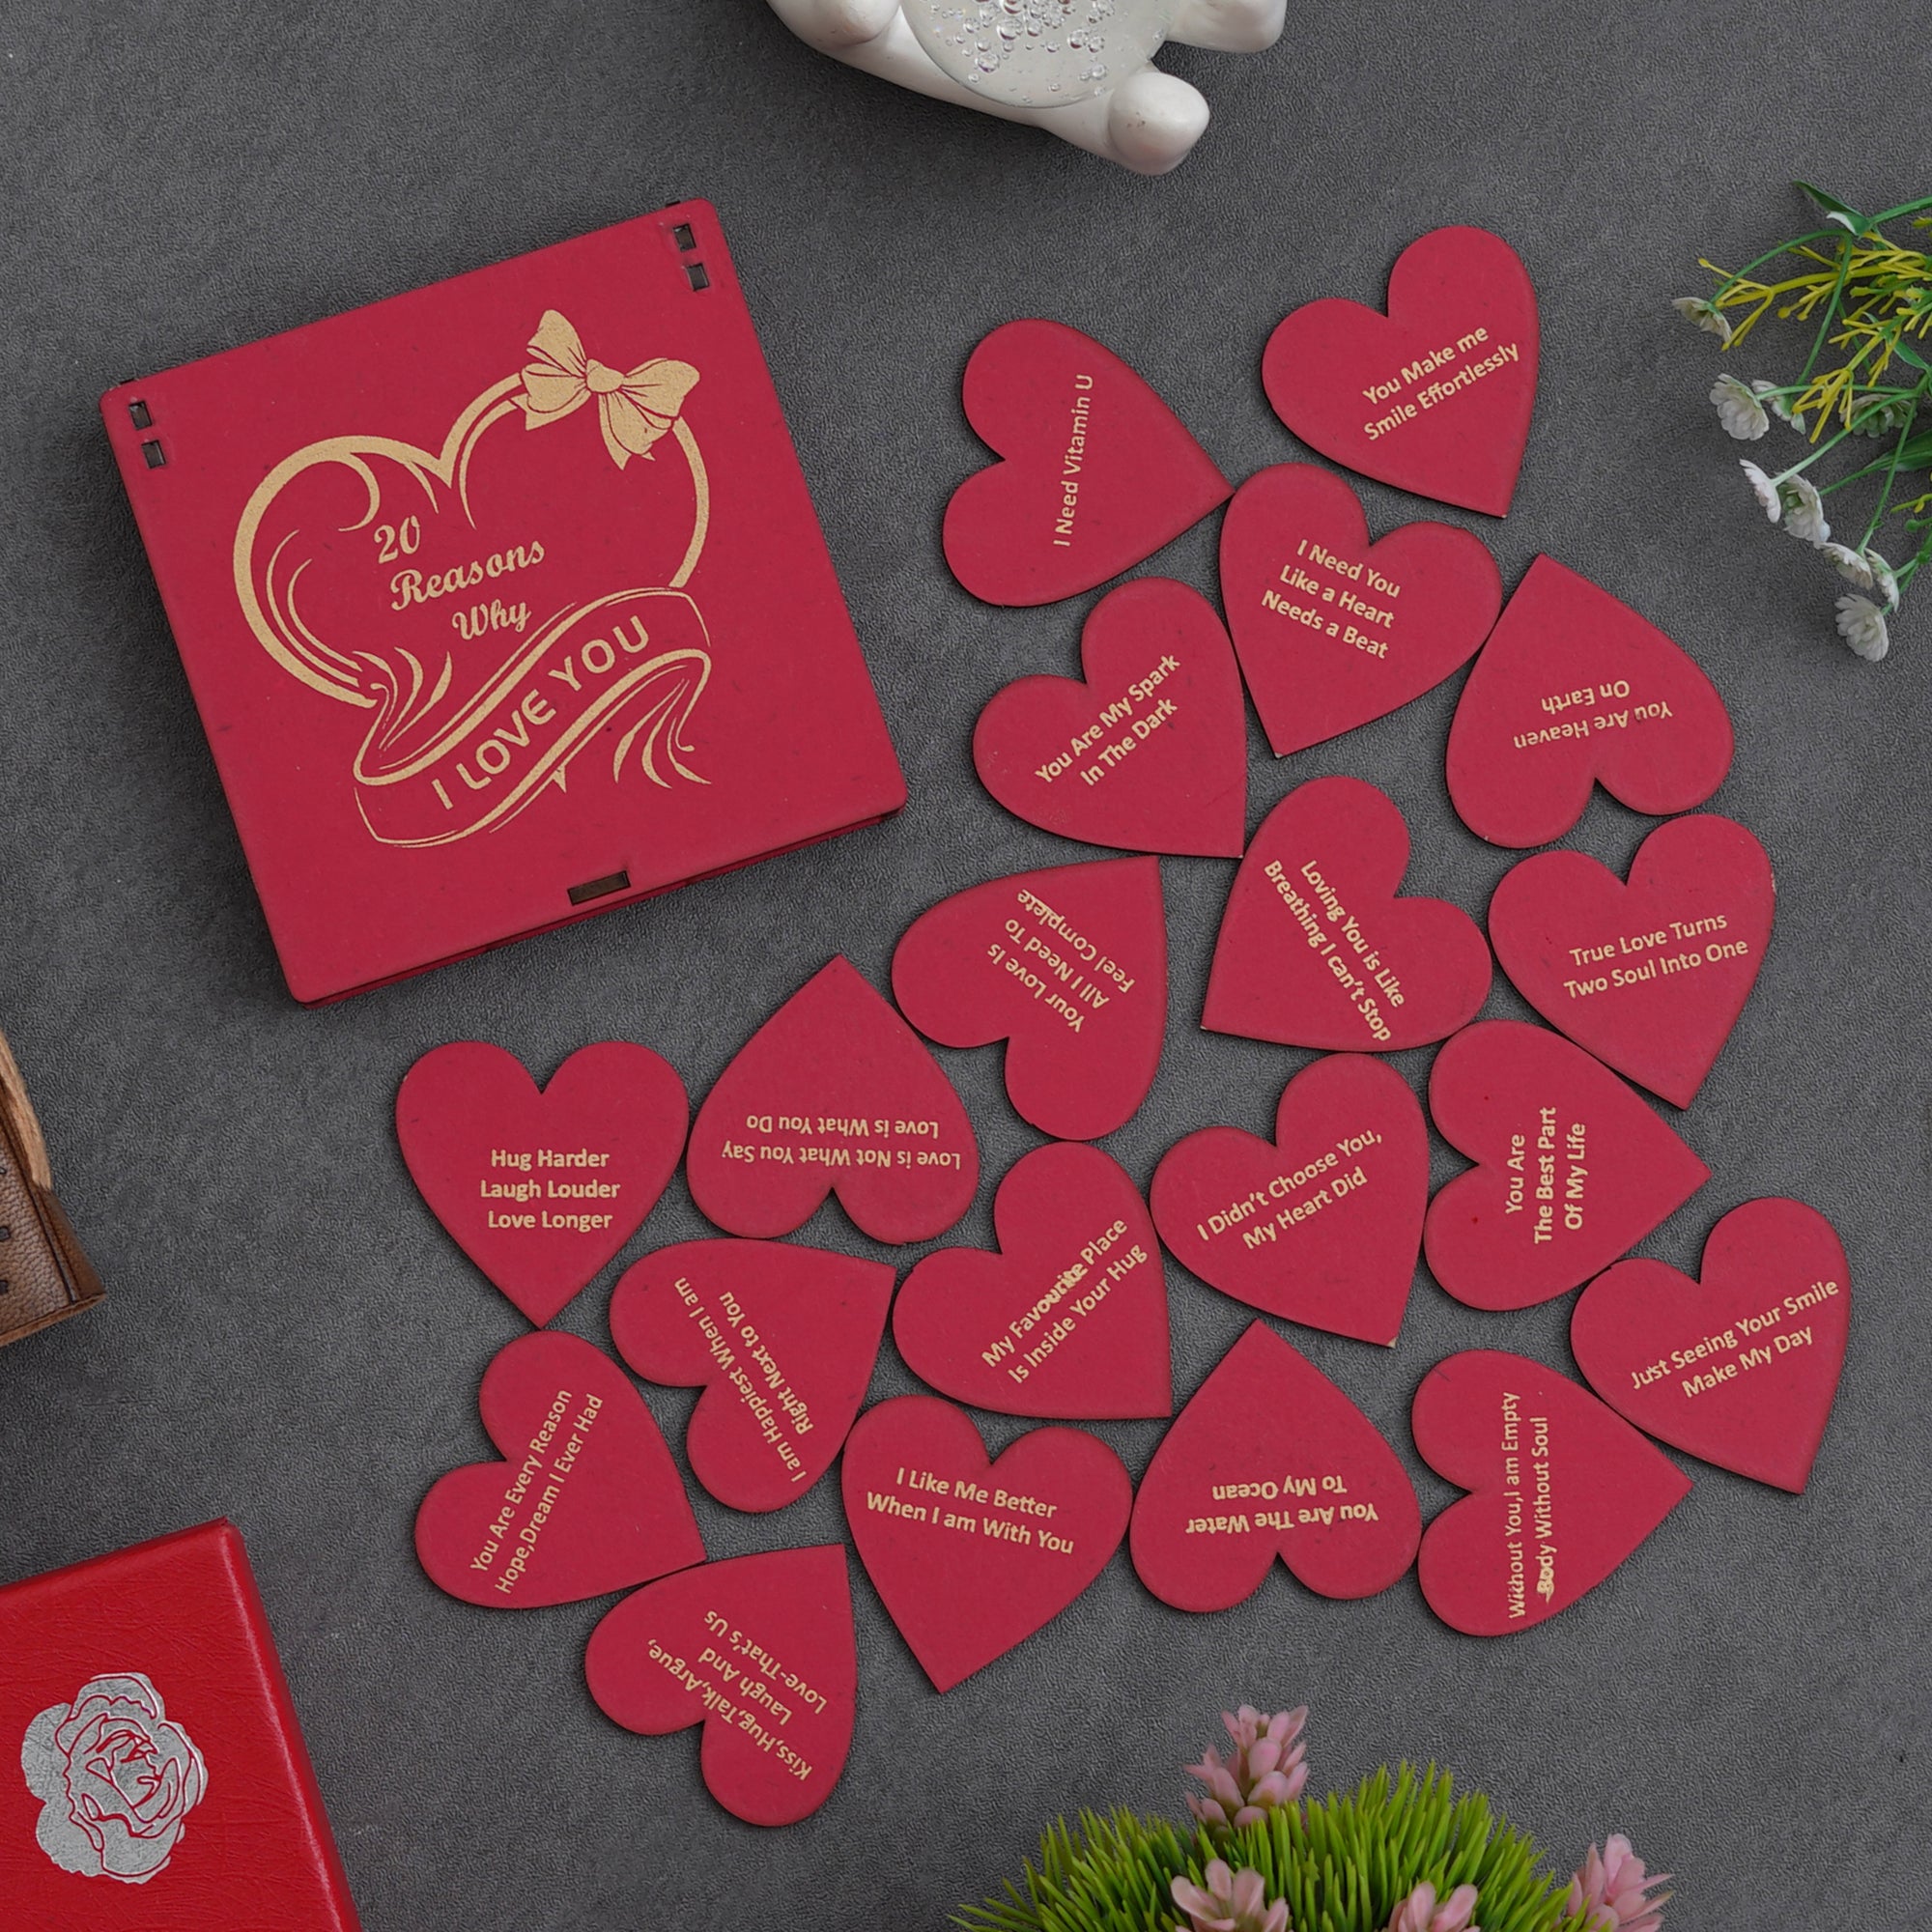 Valentine Combo of Set of 8 Love Post Cards Gift Cards Set, "20 Reasons Why I Love You" Printed on Little Red Hearts Decorative Wooden Gift Set Box 3